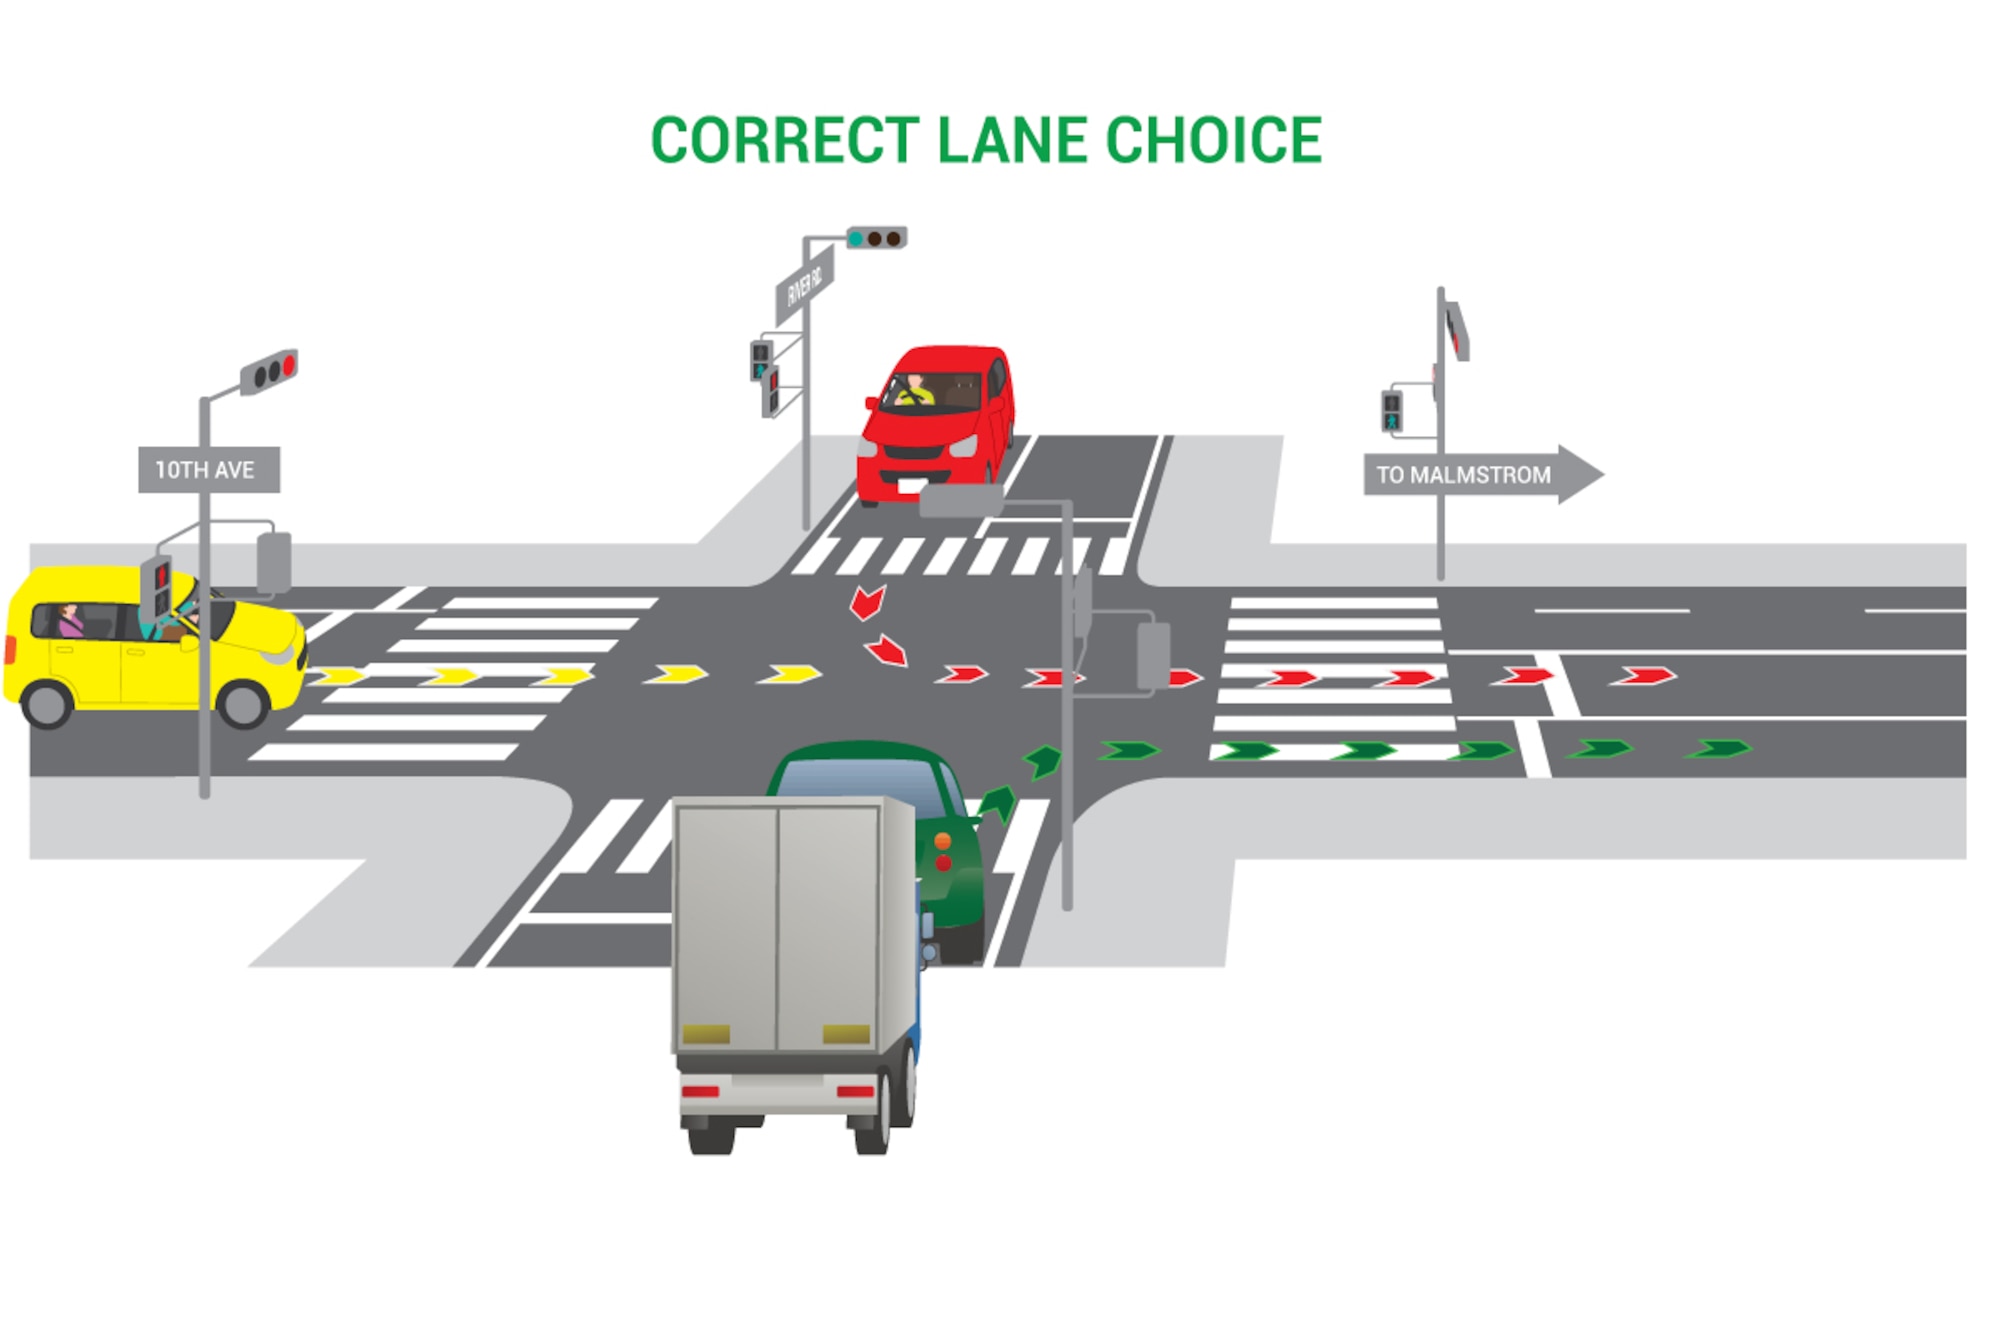 A graphic explaining the proper flow of traffic.